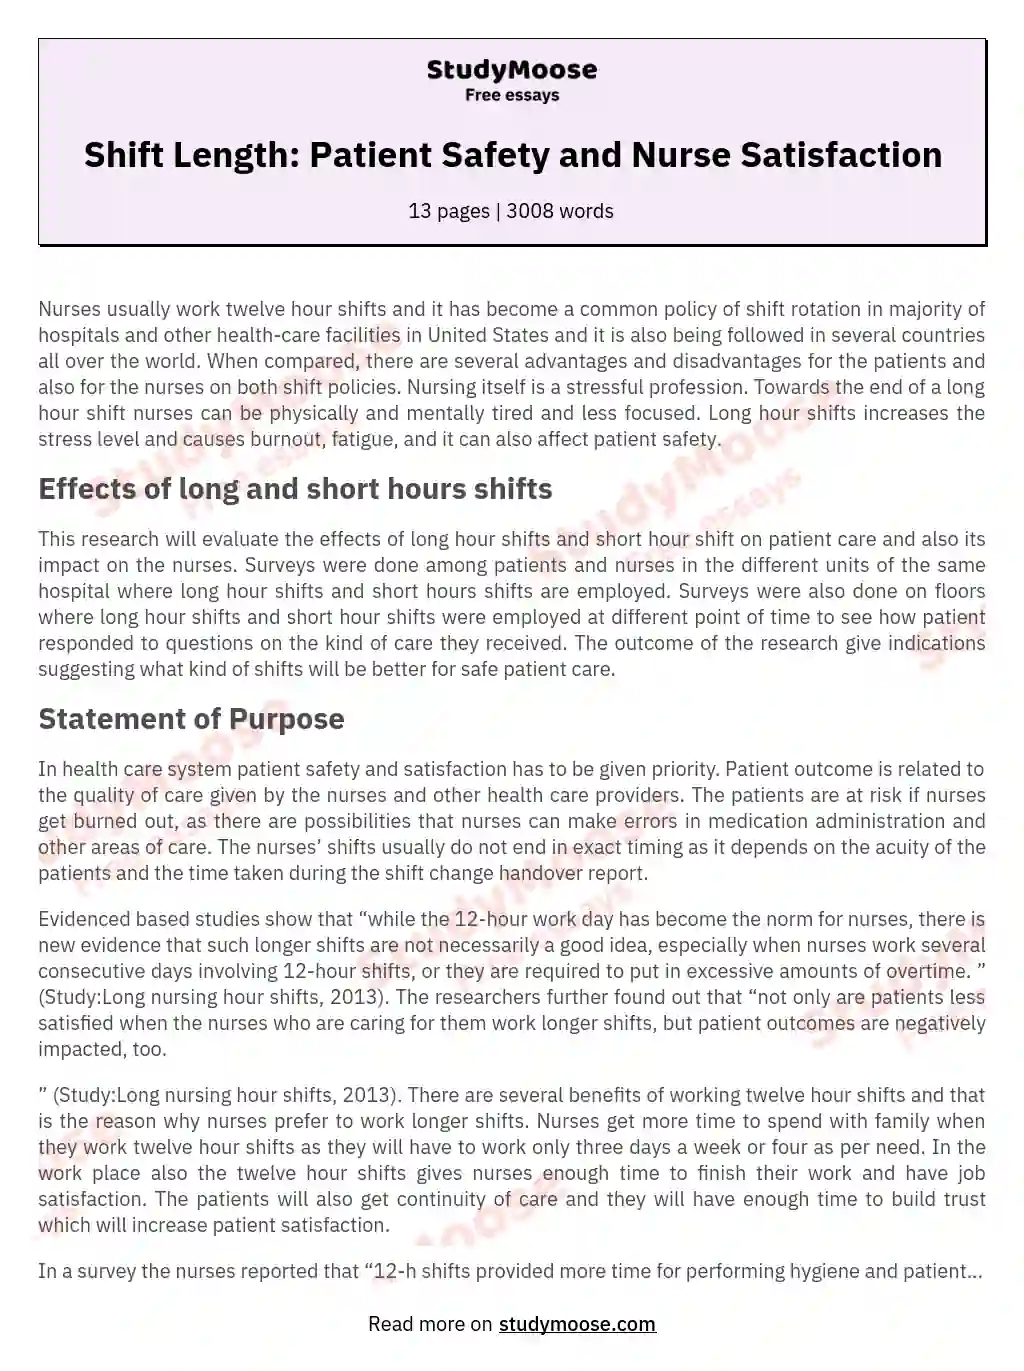 Shift Length: Patient Safety and Nurse Satisfaction essay